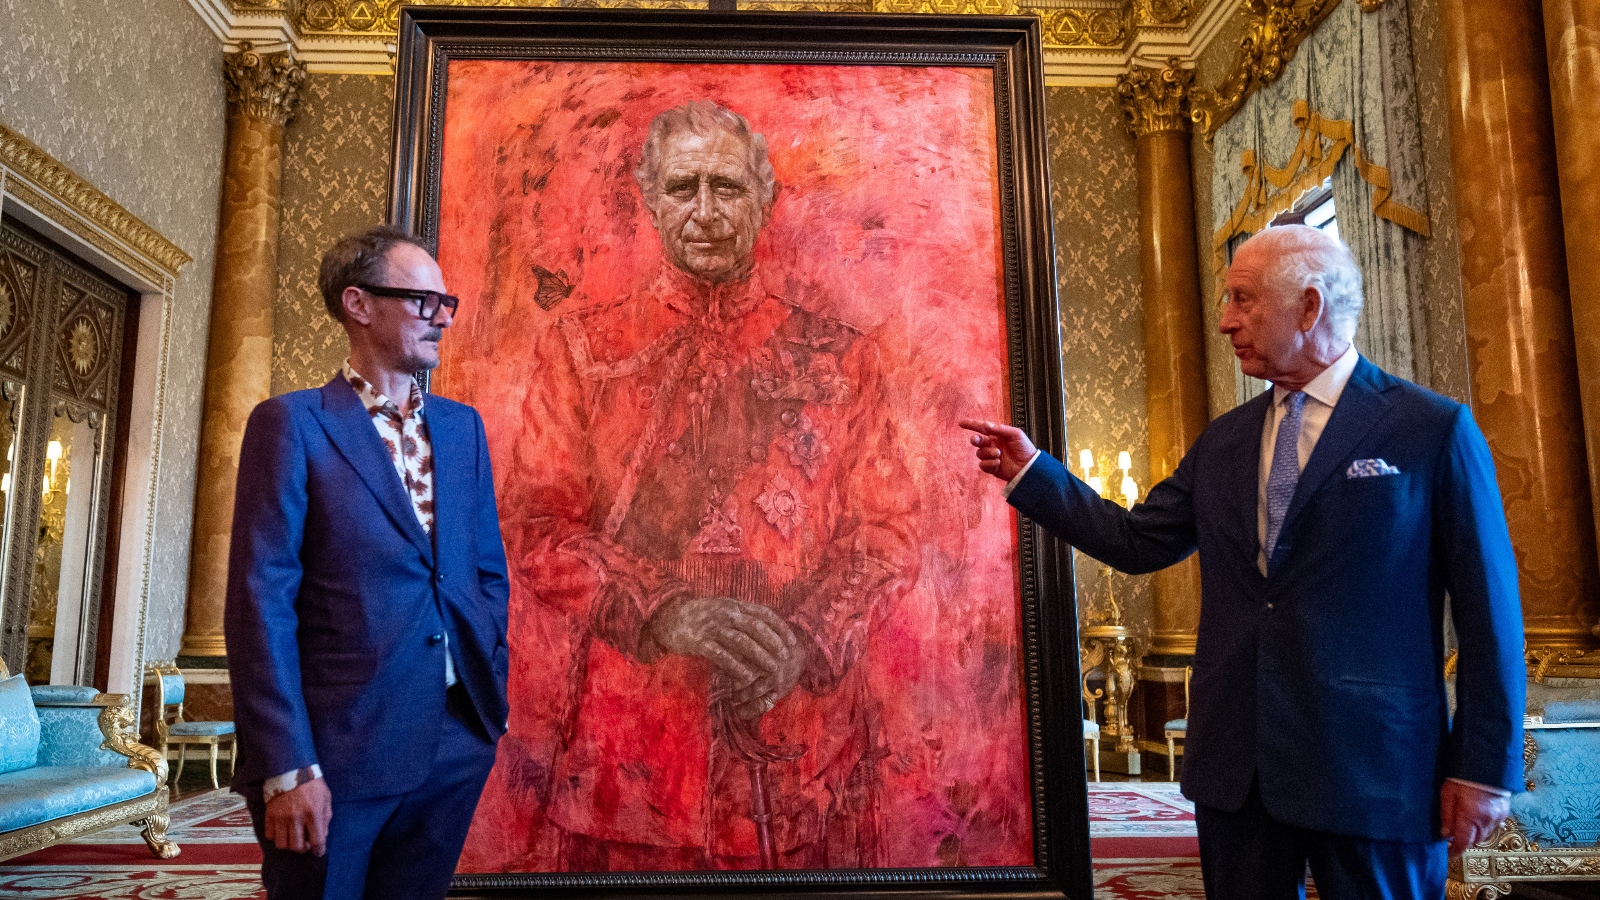 Animal Rights Activists Vandalize King Charles' New Portrait